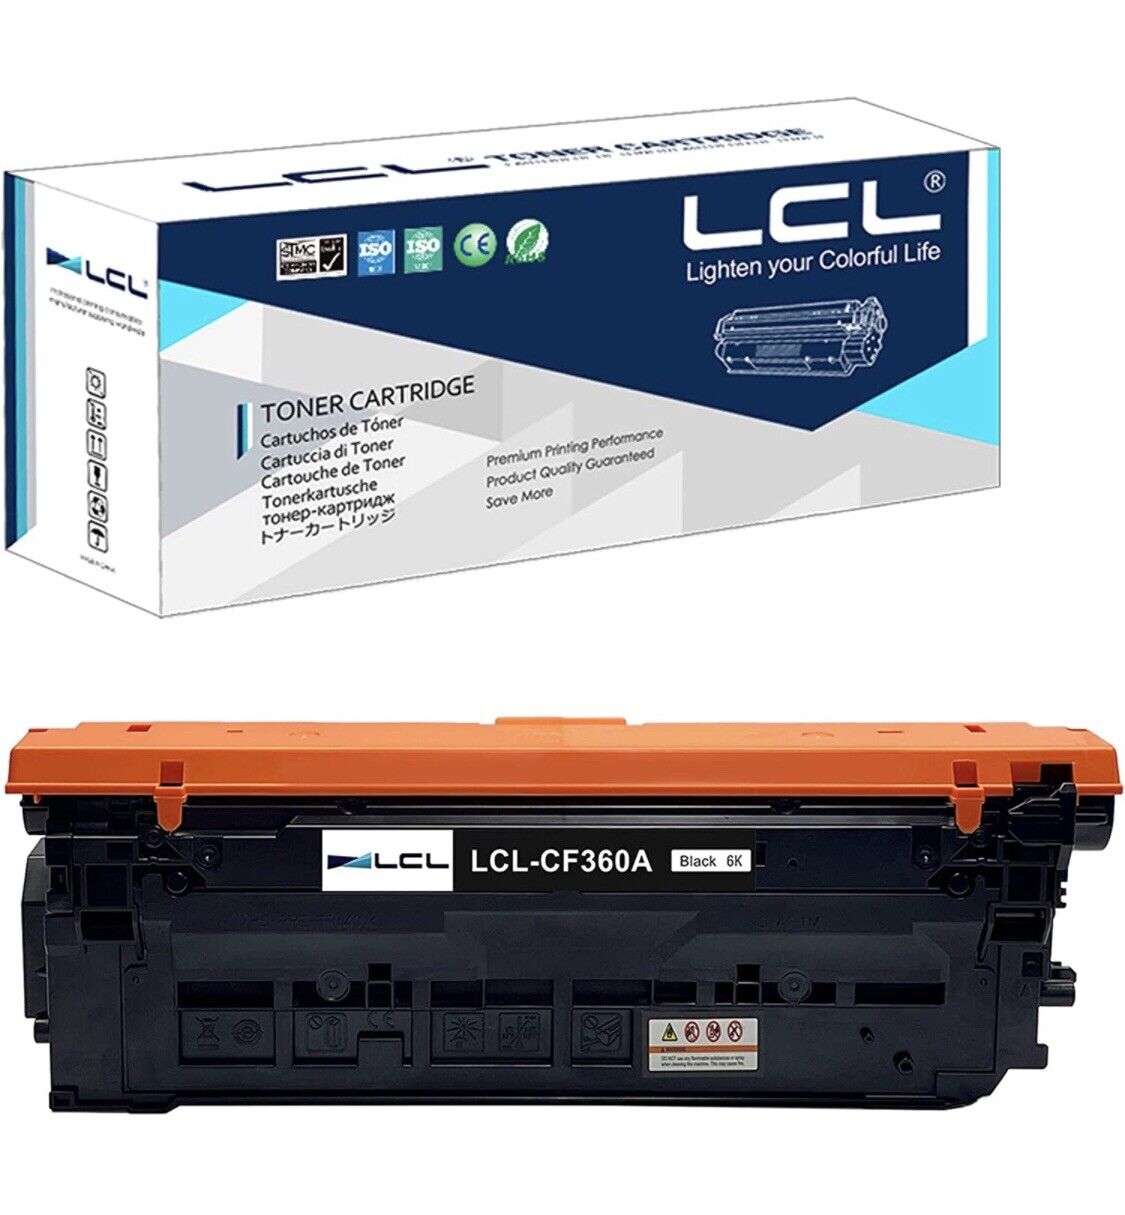 1 Pack LCL Toner Cartridge Replacement for LCL-Phaser 6020/106R 02759 Black